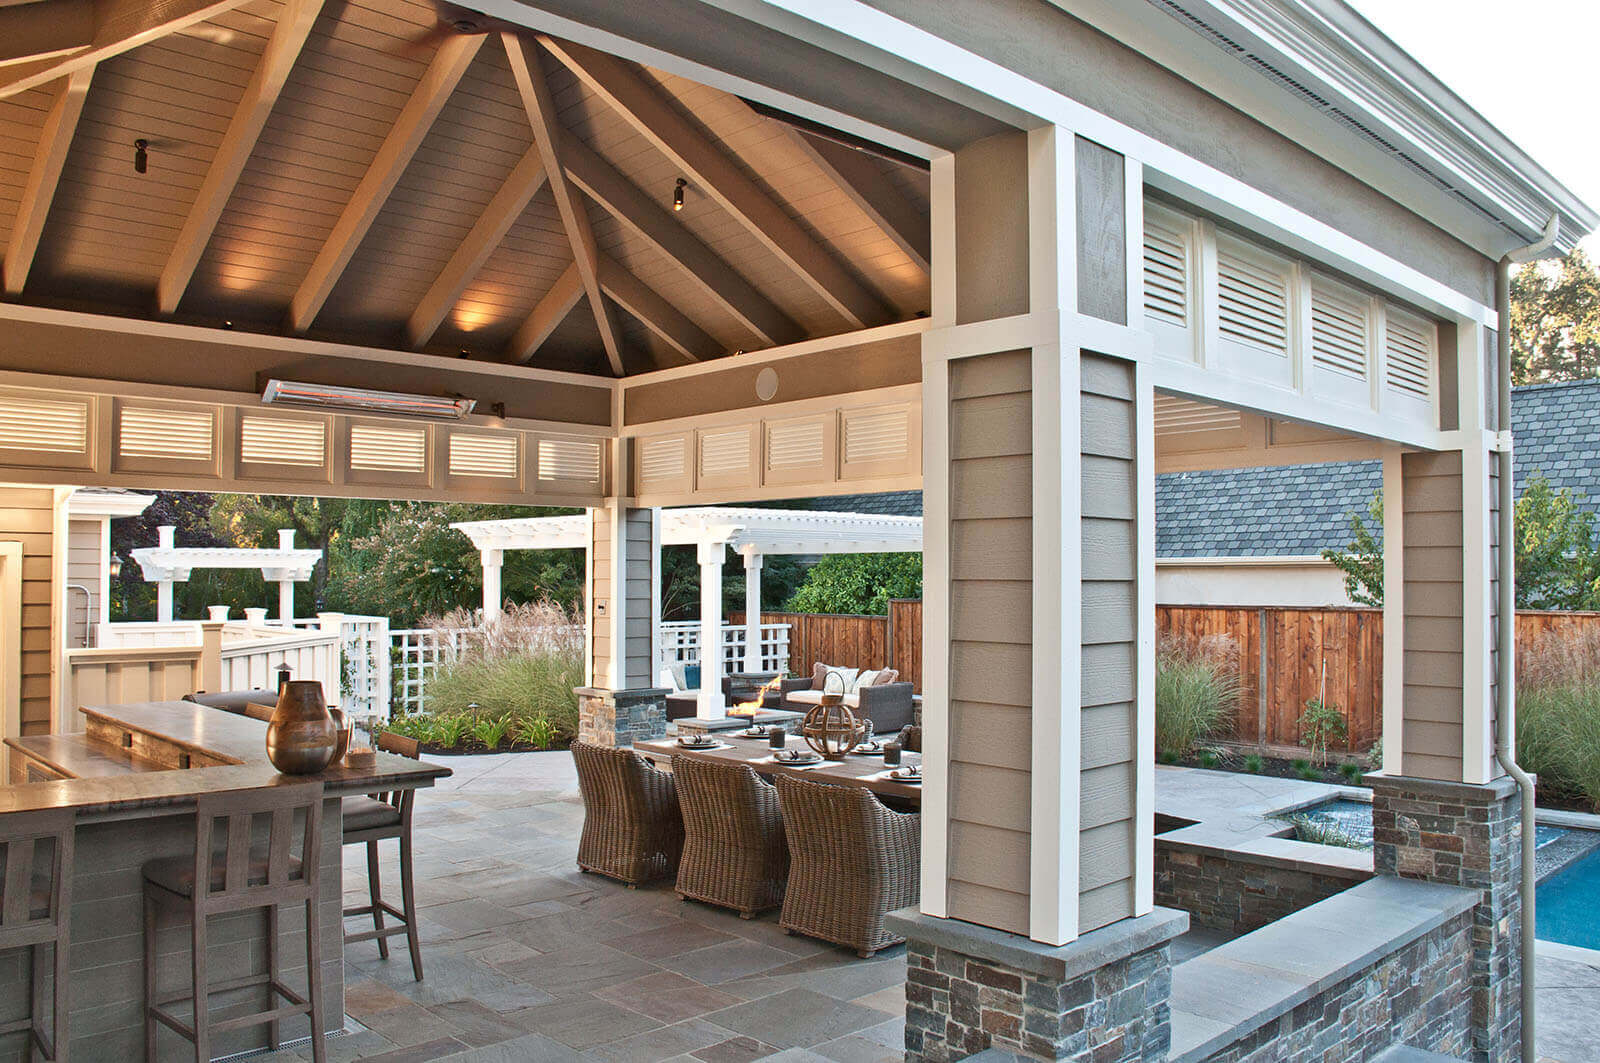 Pyramid-roofed pergola with slatted sun-shades covers outdoor bar and dining area on bluestone patio